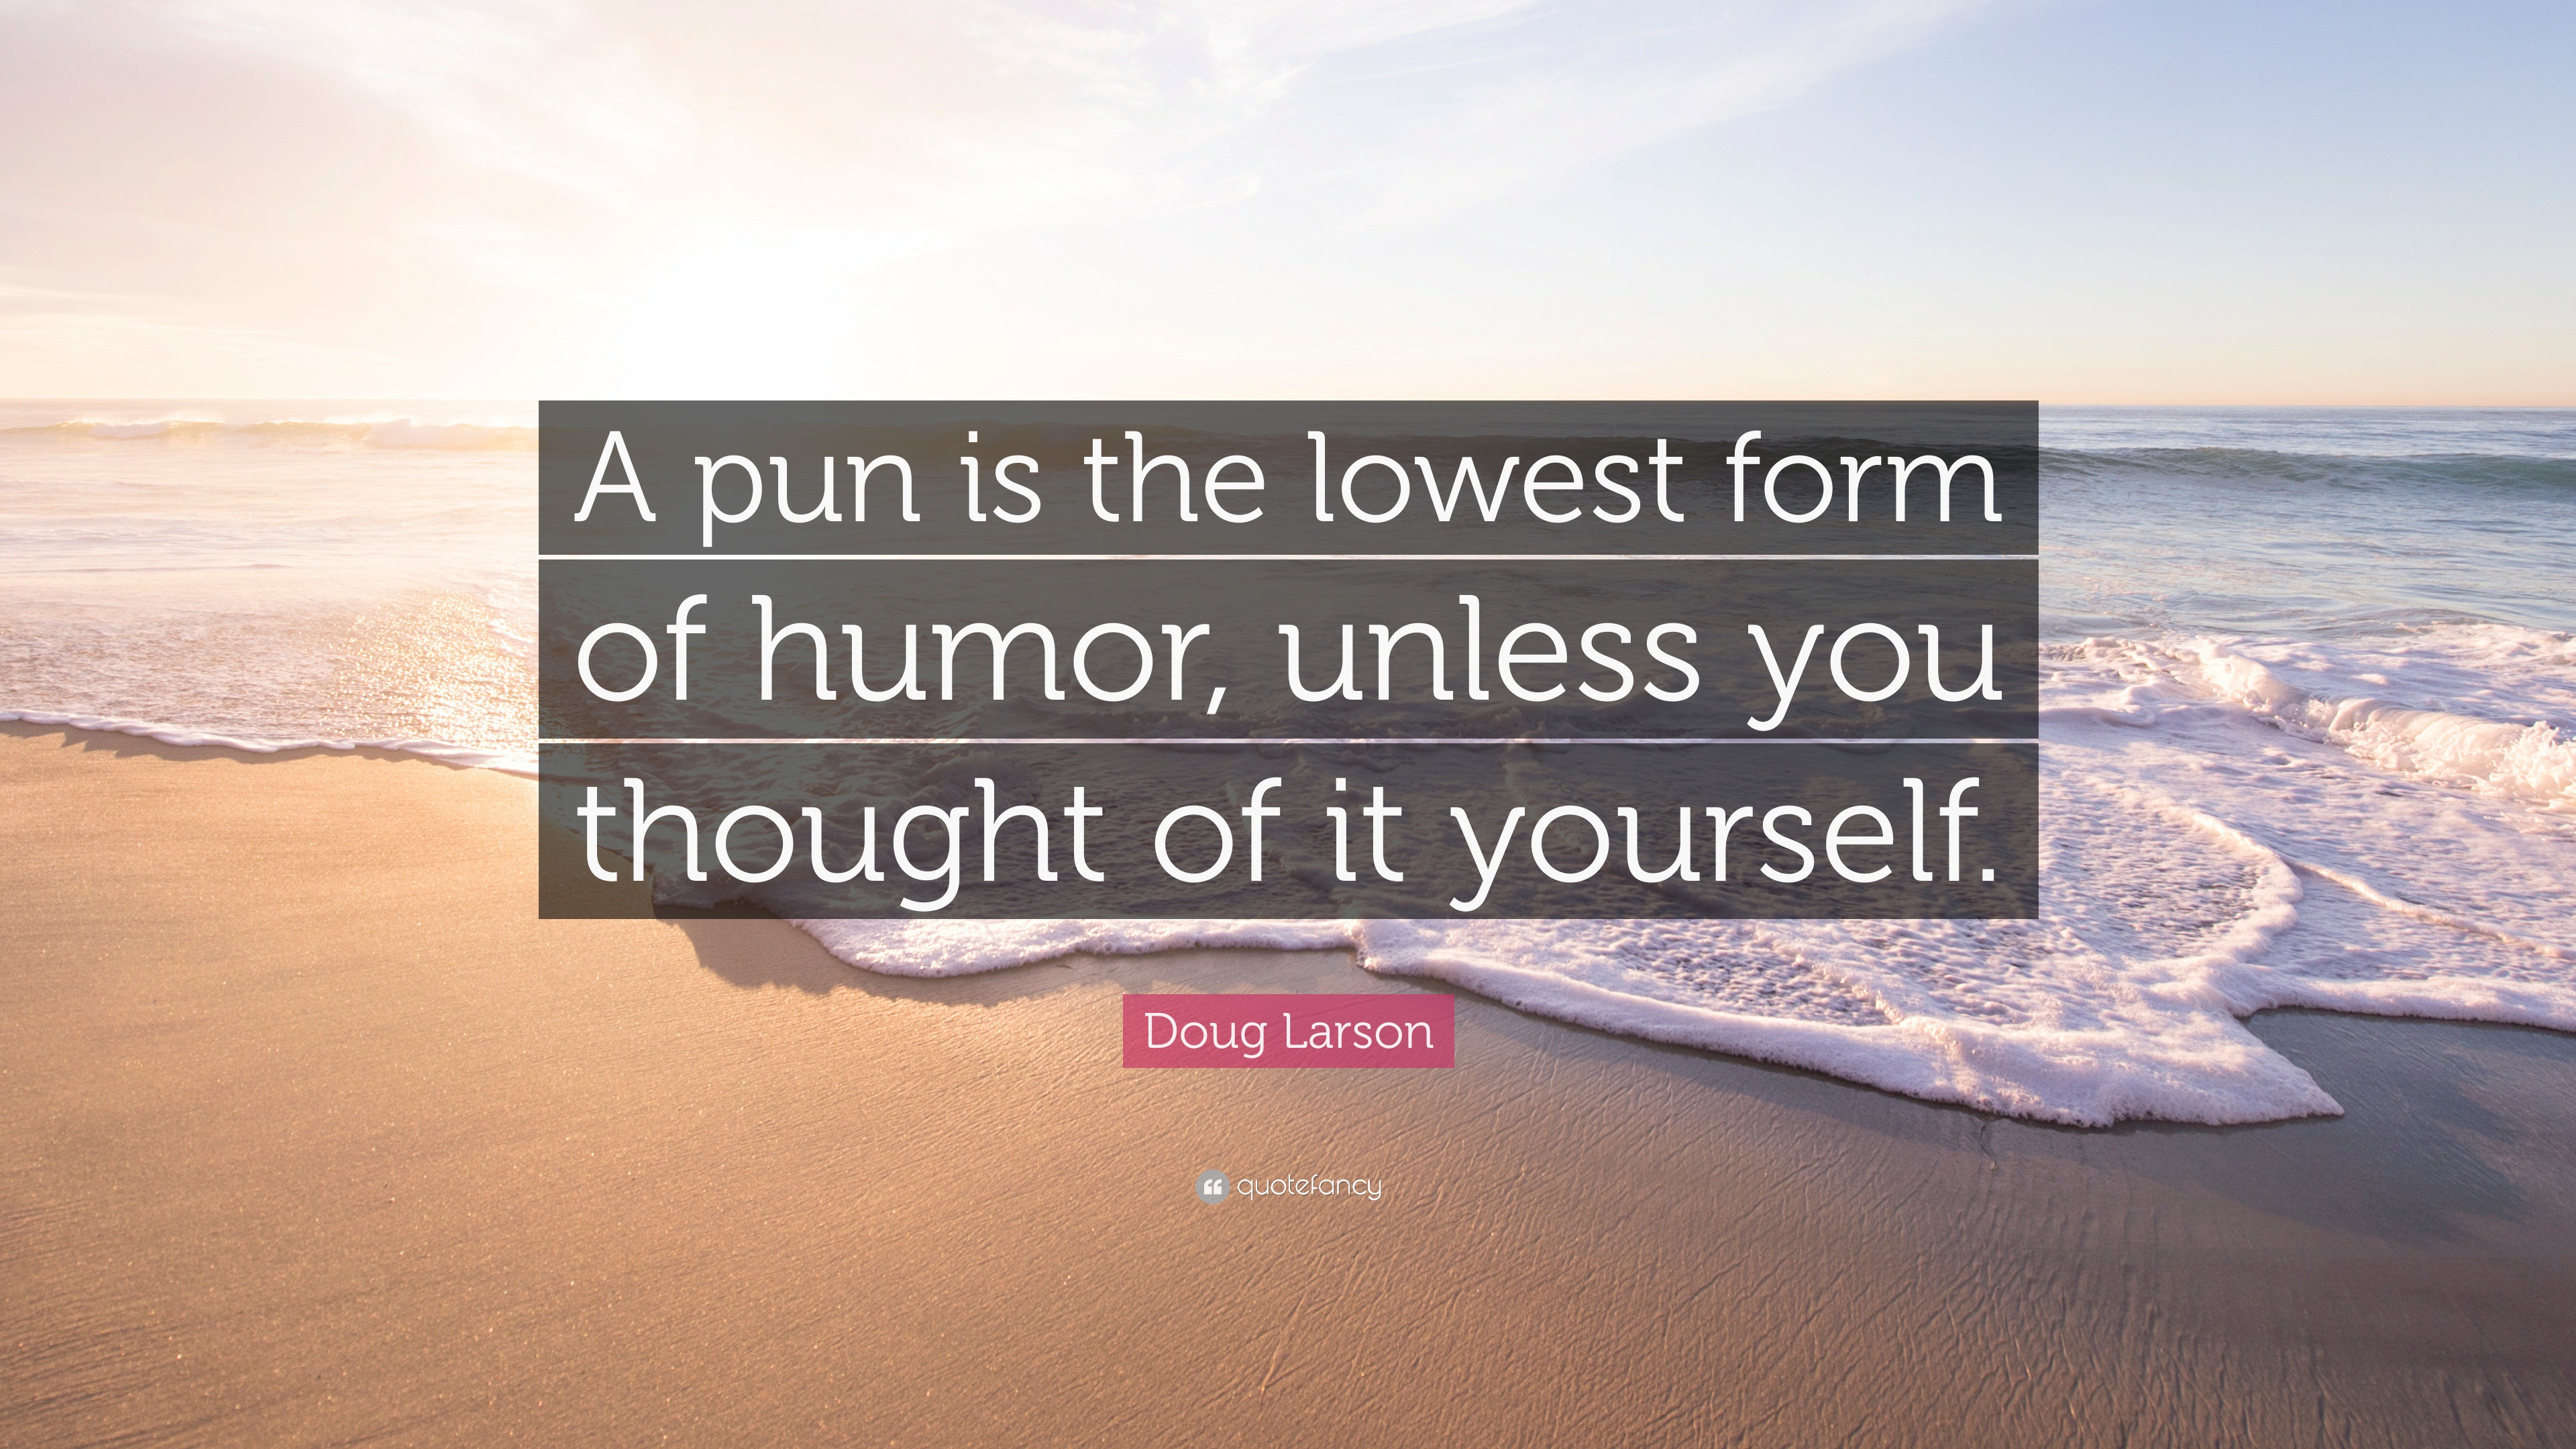 Doug Larson Quote: "A pun is the lowest form of humor, unles